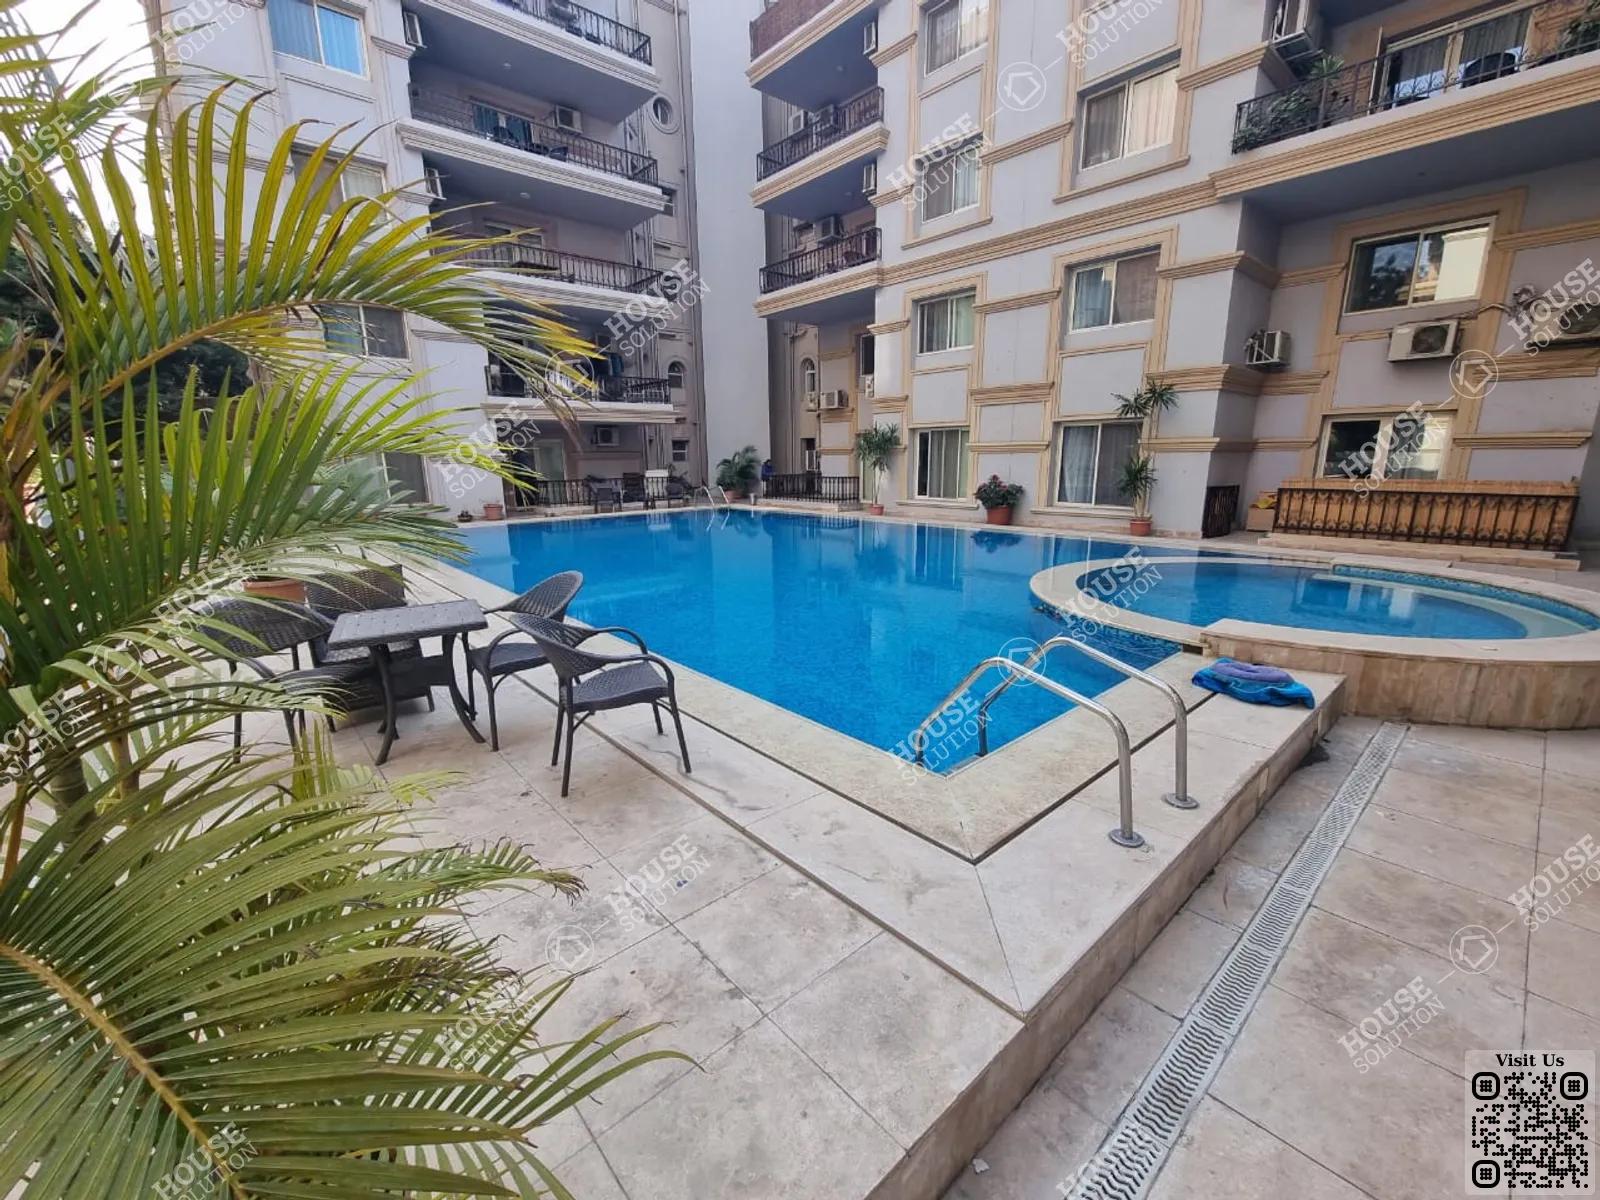 SHARED SWIMMING POOL  @ Ground Floors For Rent In Maadi Maadi Sarayat Area: 300 m² consists of 4 Bedrooms 3 Bathrooms Modern furnished 5 stars #4590-2